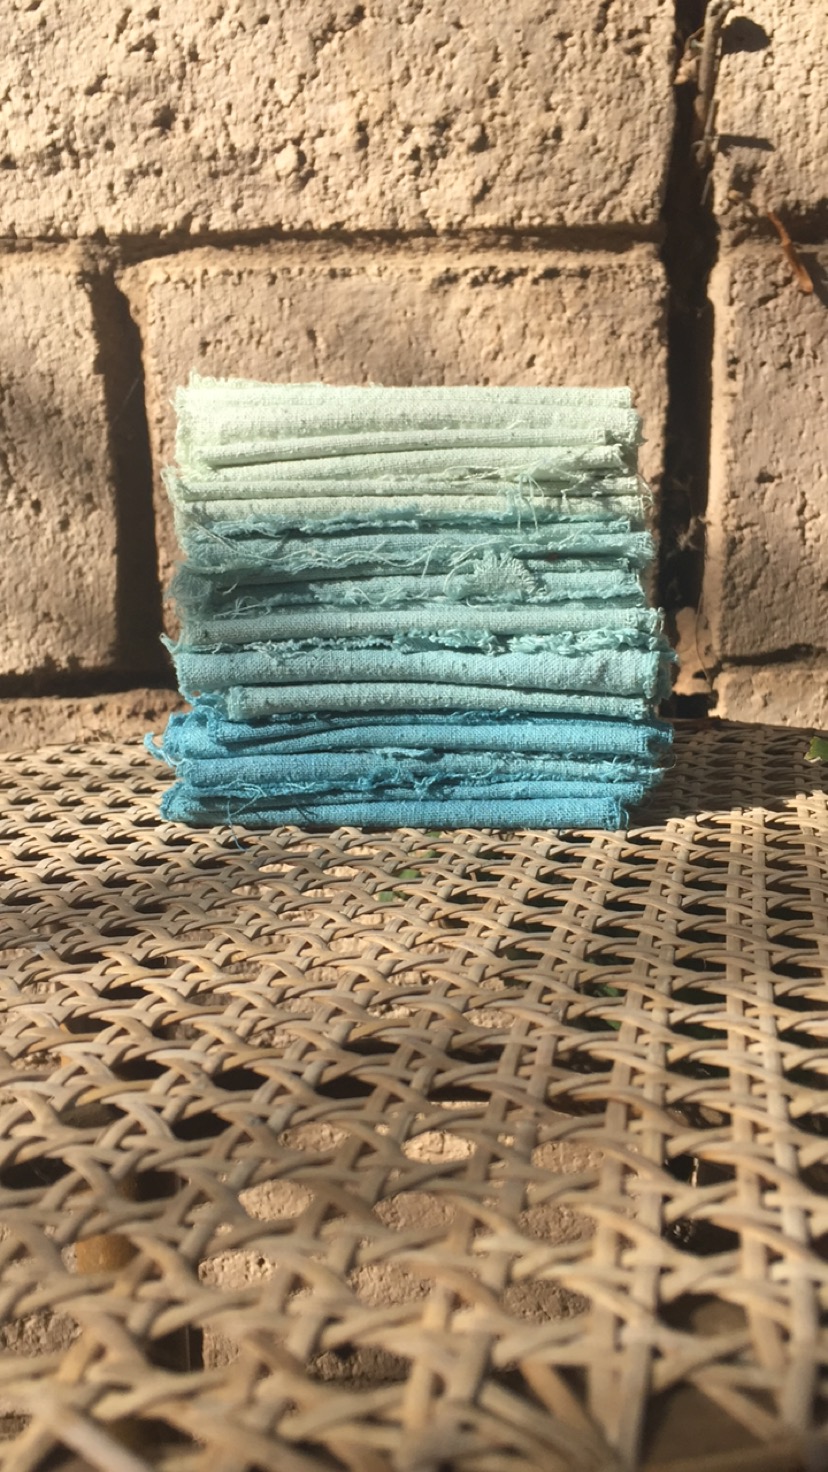  fresh indigo dyed raw silk- from bottom to top a range of blues and greens produced as the dye bath exhausts 